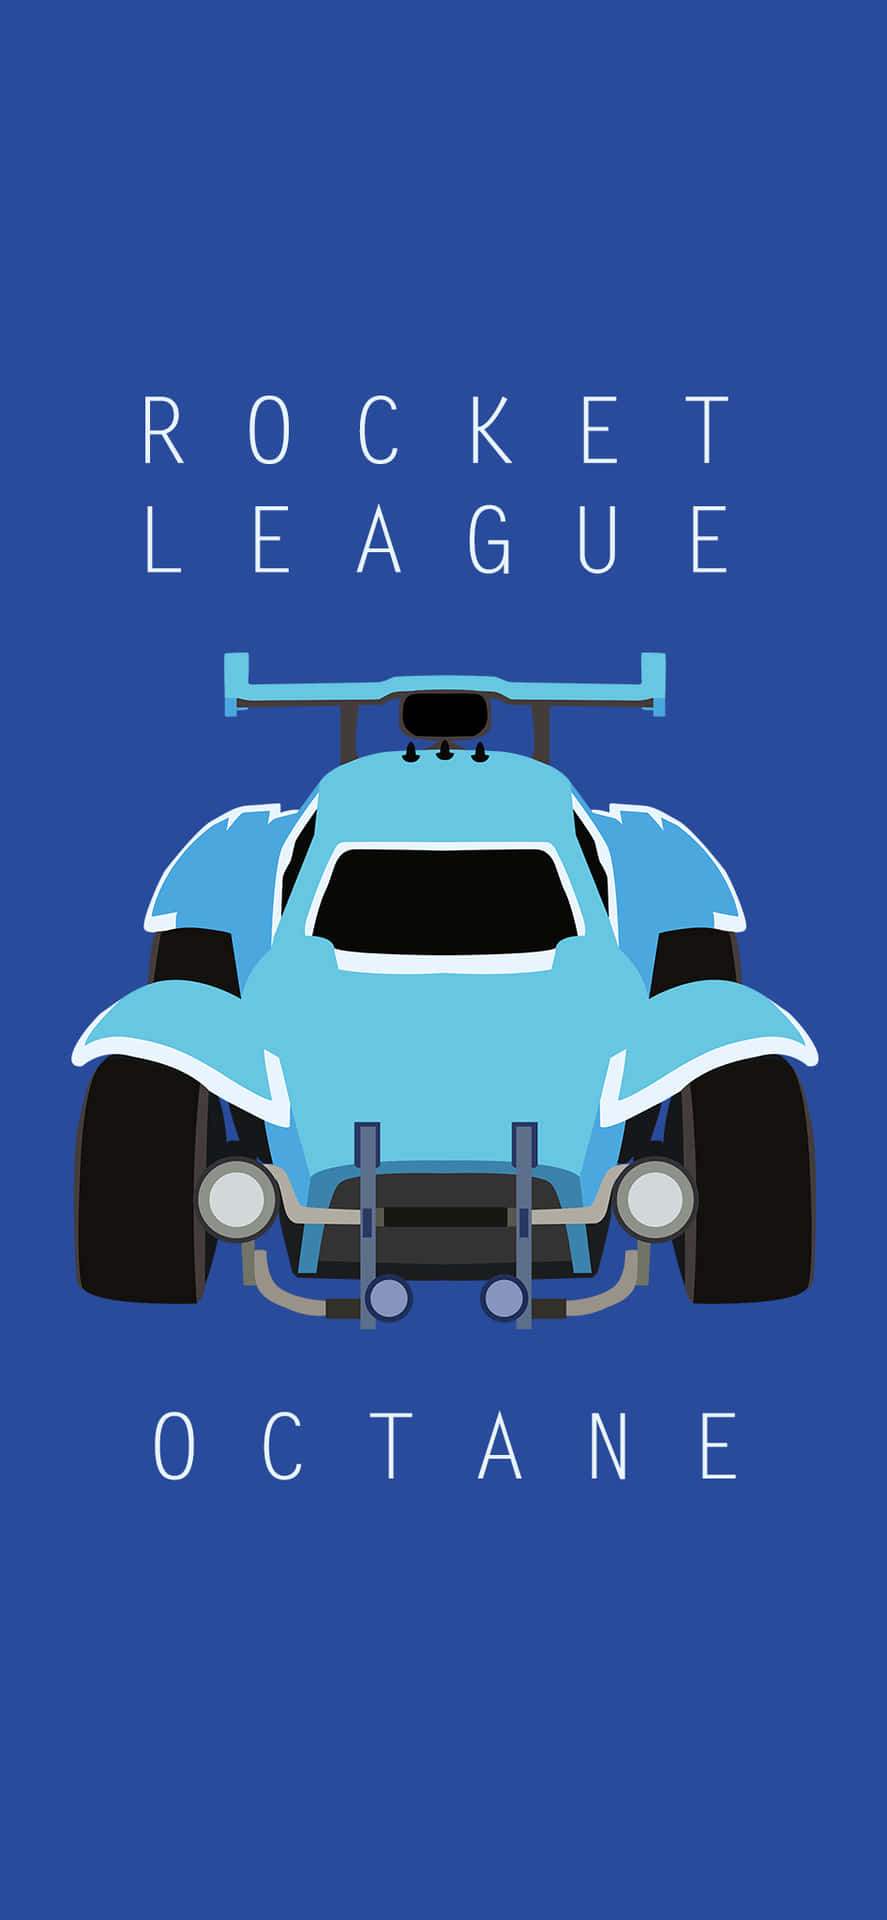 The best Rocket League players showcase their skills